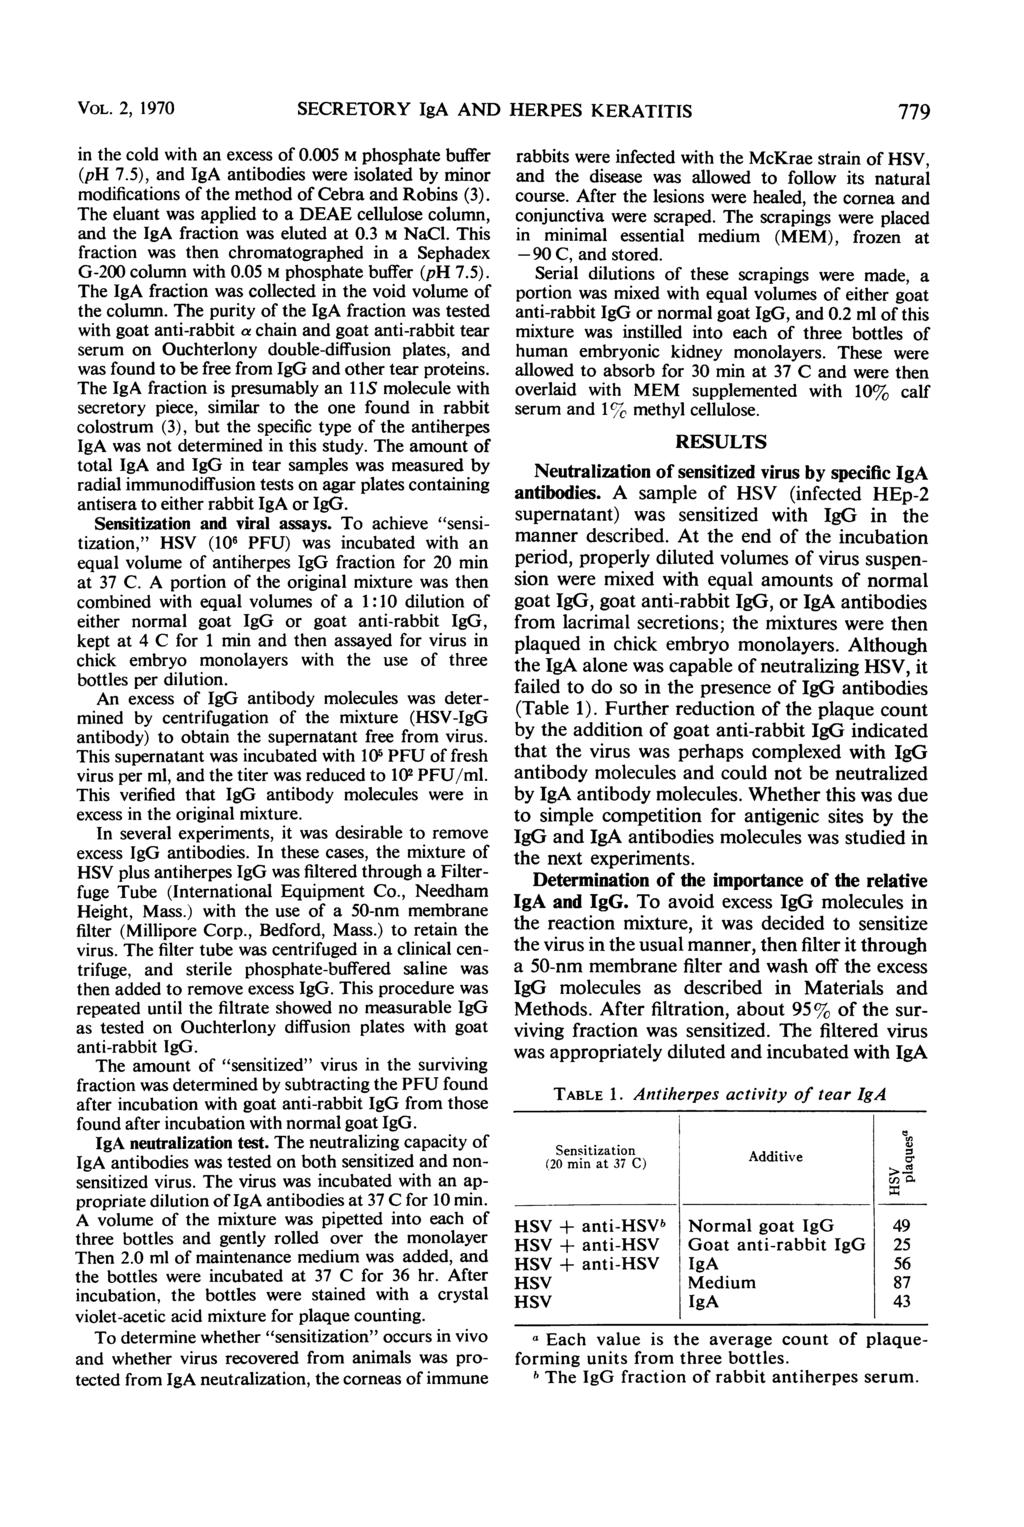 VOL. 2, 1970 SECRETORY IgA AND HERPES KERATITIS 779 in the cold with an excess of 0.005 M phosphate buffer (ph 7.